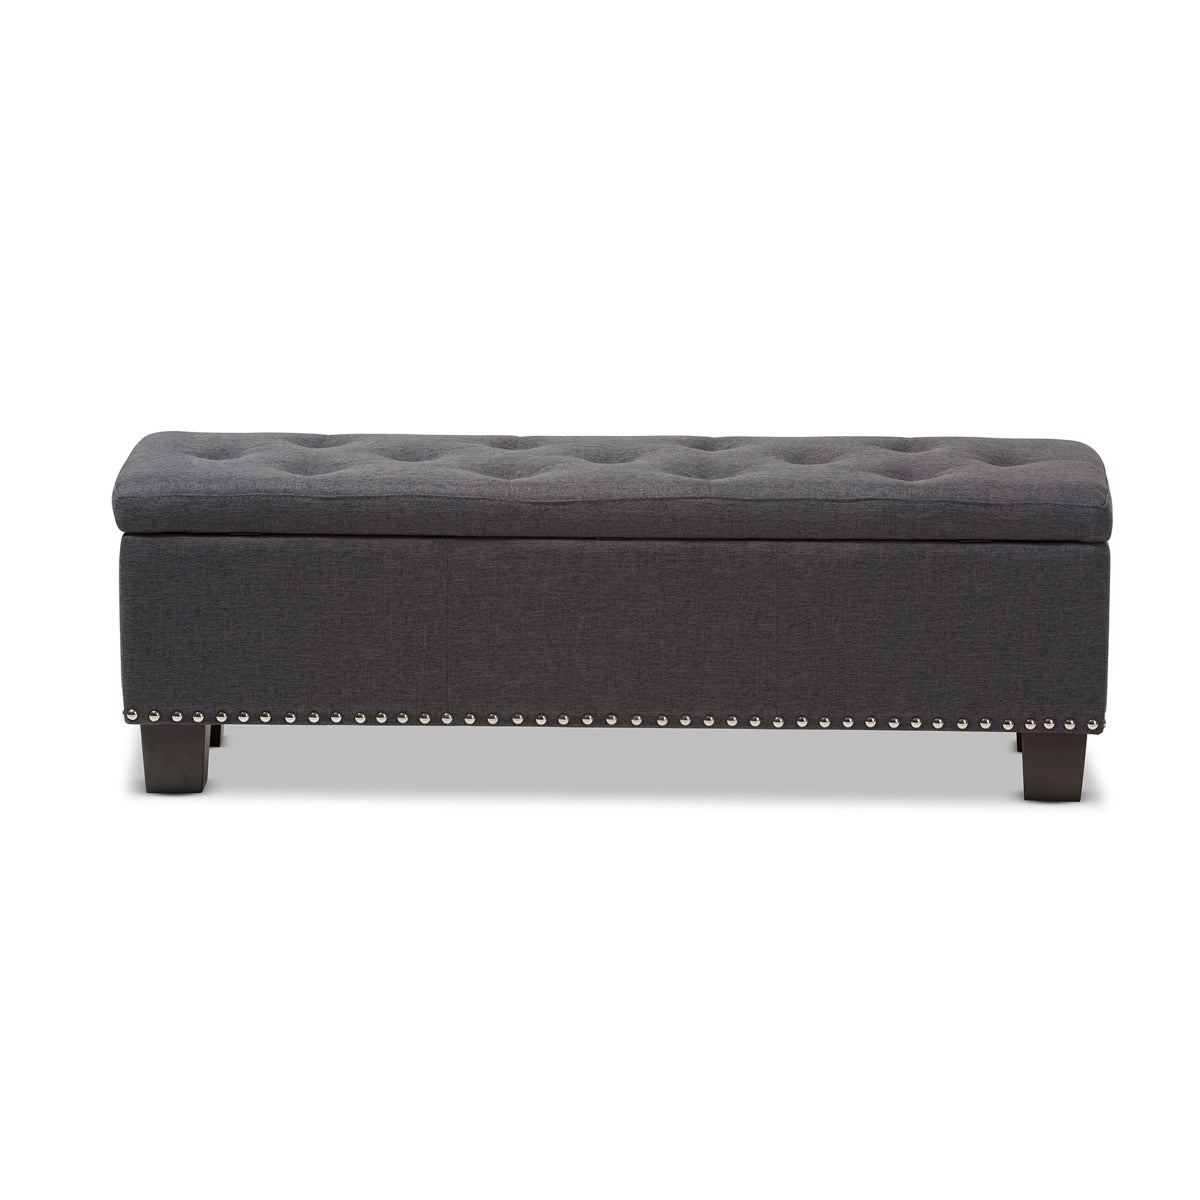 Baxton Studio Hannah Modern and Contemporary Dark Grey Fabric Upholstered Button-Tufting Storage Ottoman Bench Baxton Studio-benches-Minimal And Modern - 6